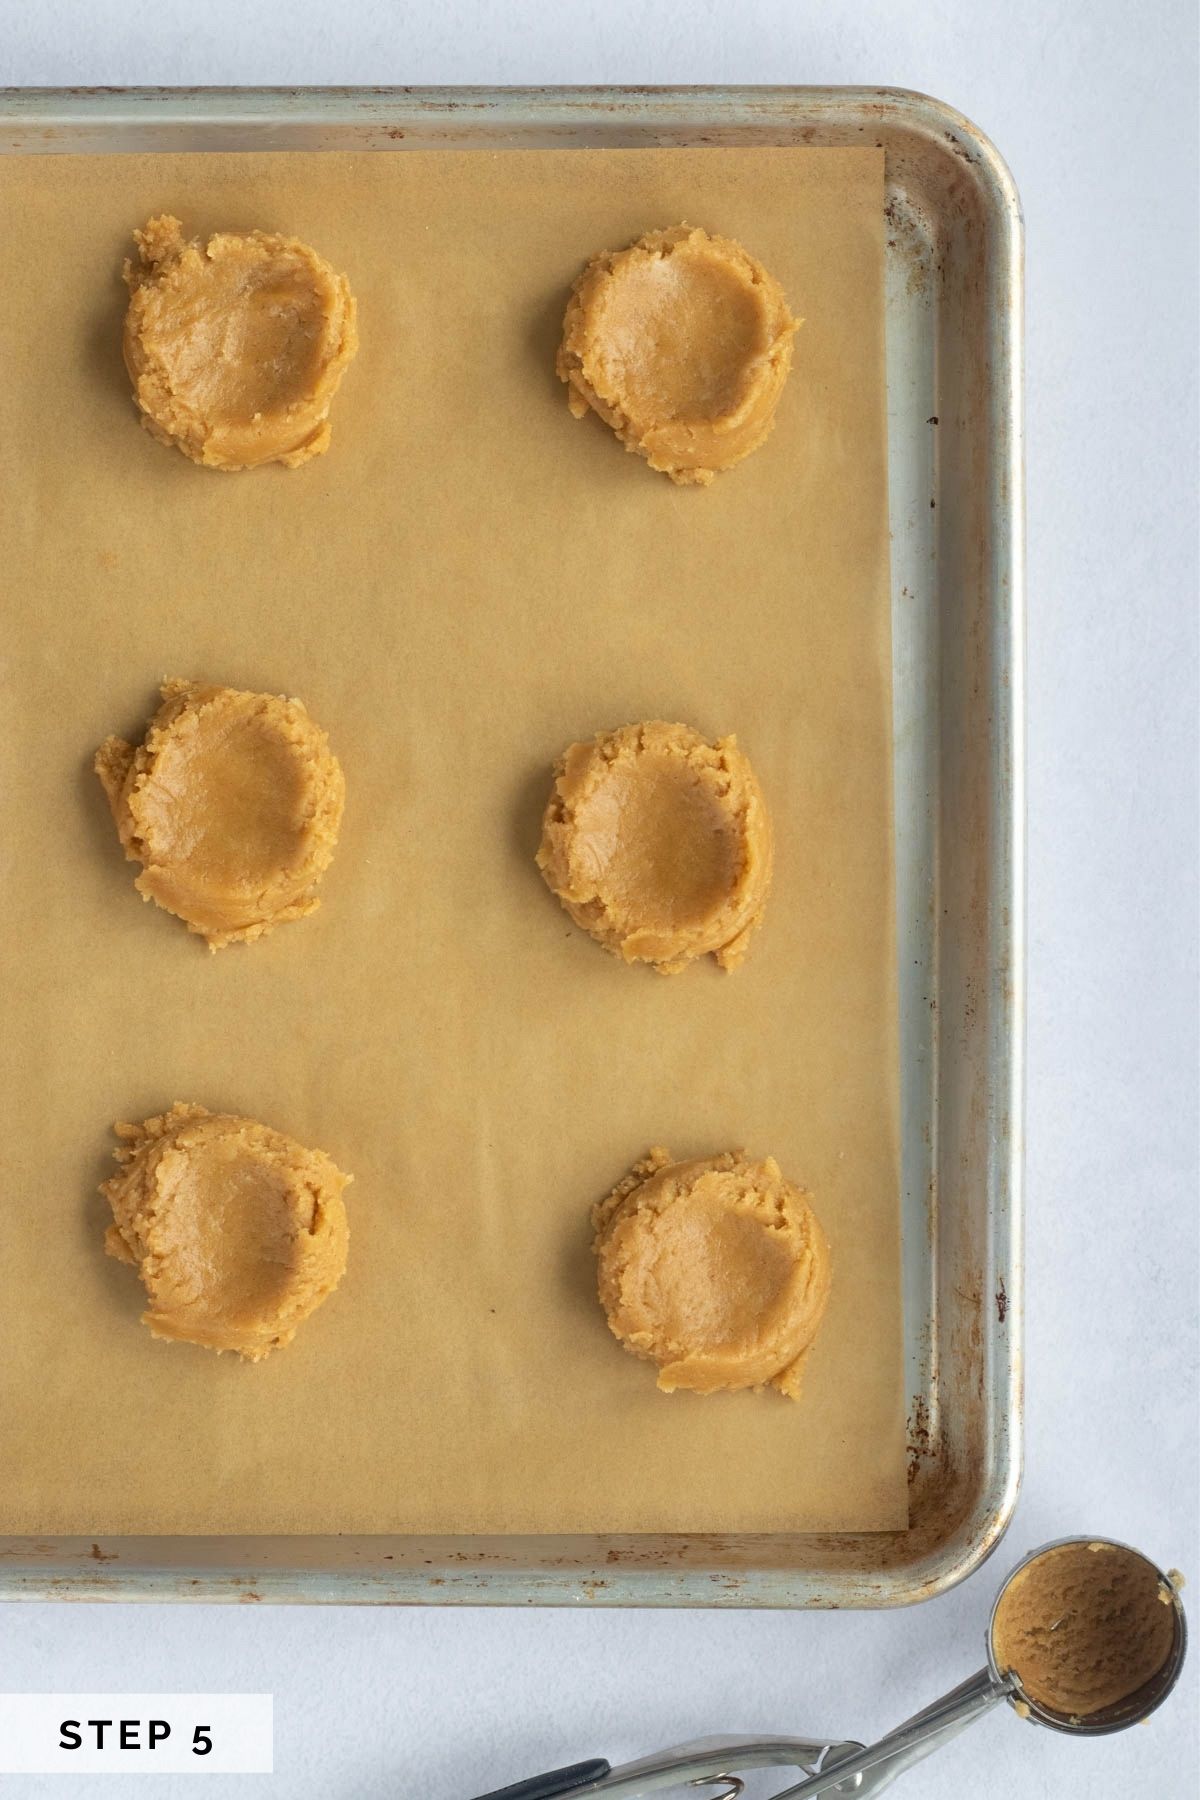 Scoop dough onto cookie sheet and press down the centers to flatten. 